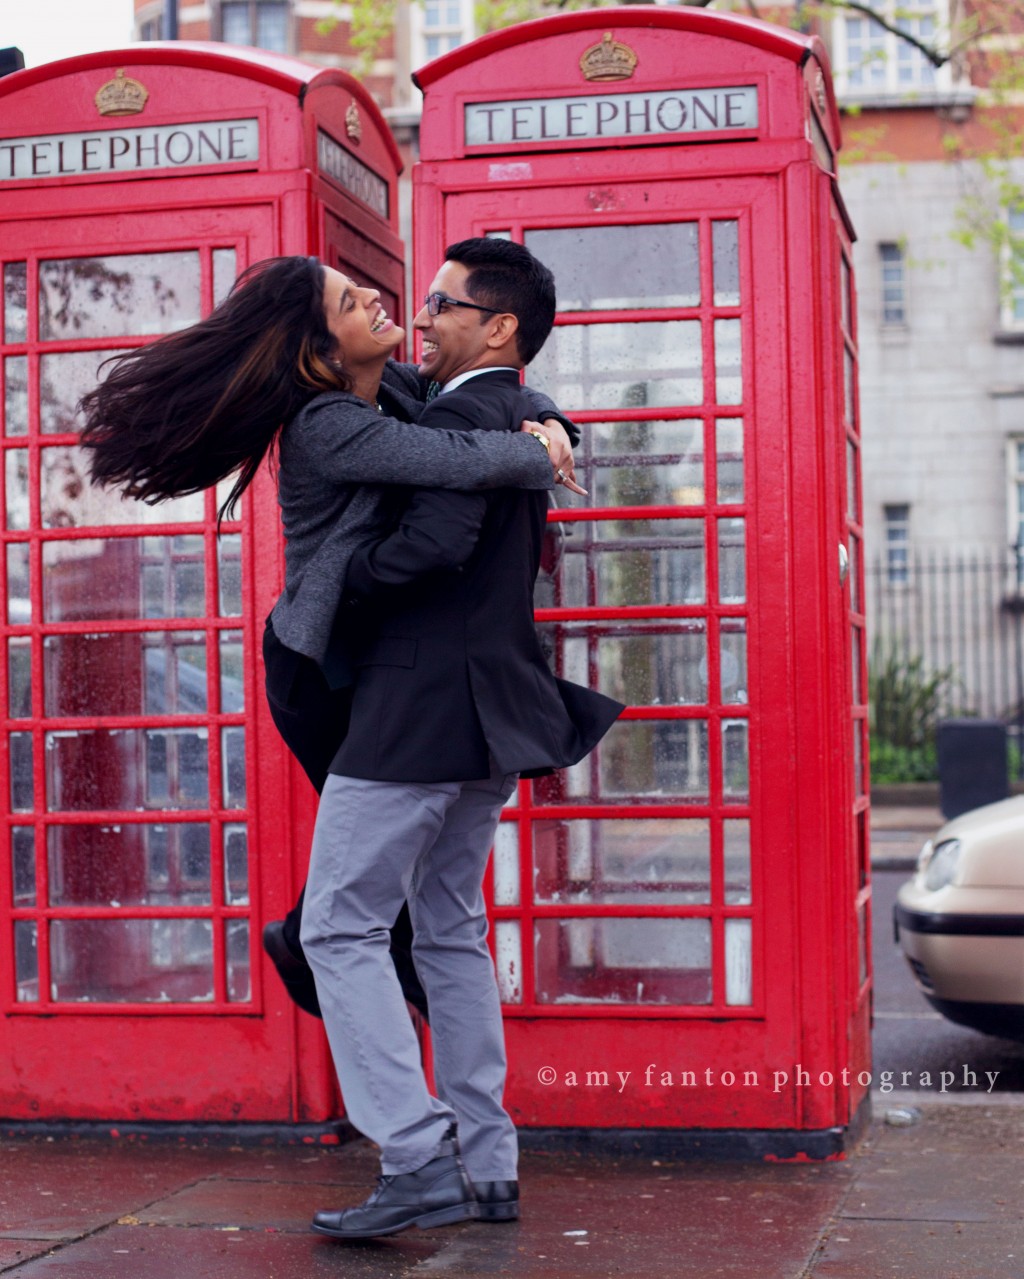 london Telephone Booth Engagement Photo